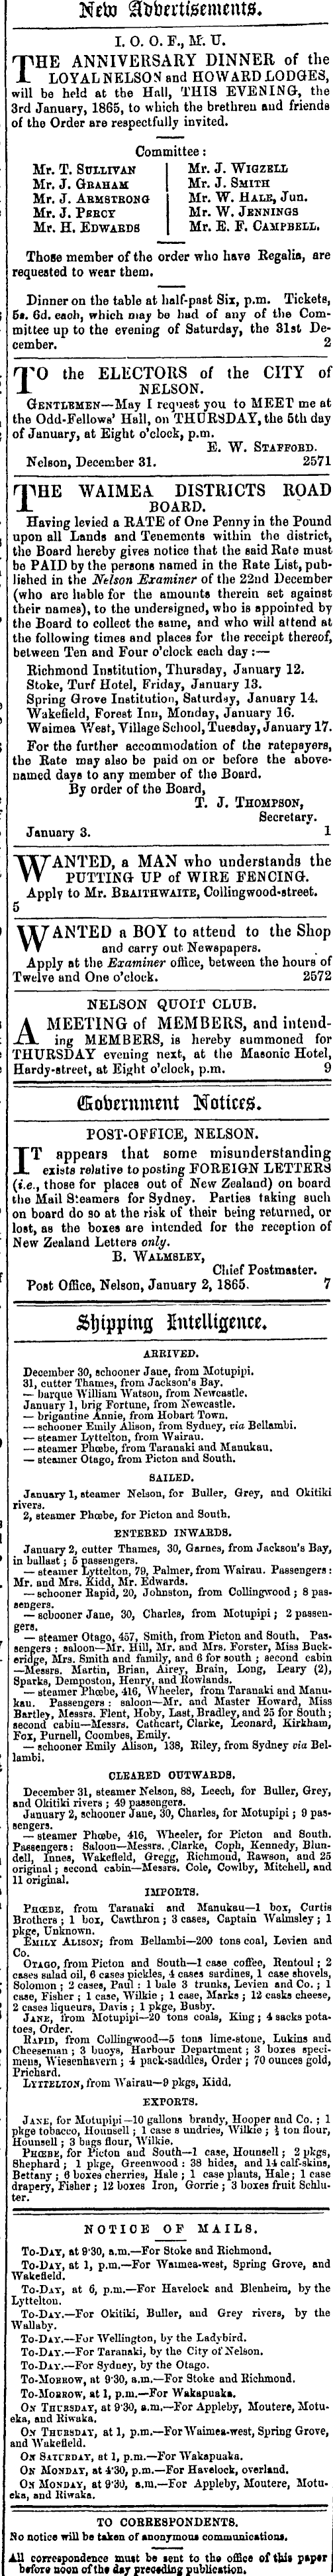 Papers Past Newspapers Nelson Examiner And New Zealand Chronicle 3 January 1865 Page 2 Advertisements Column 2